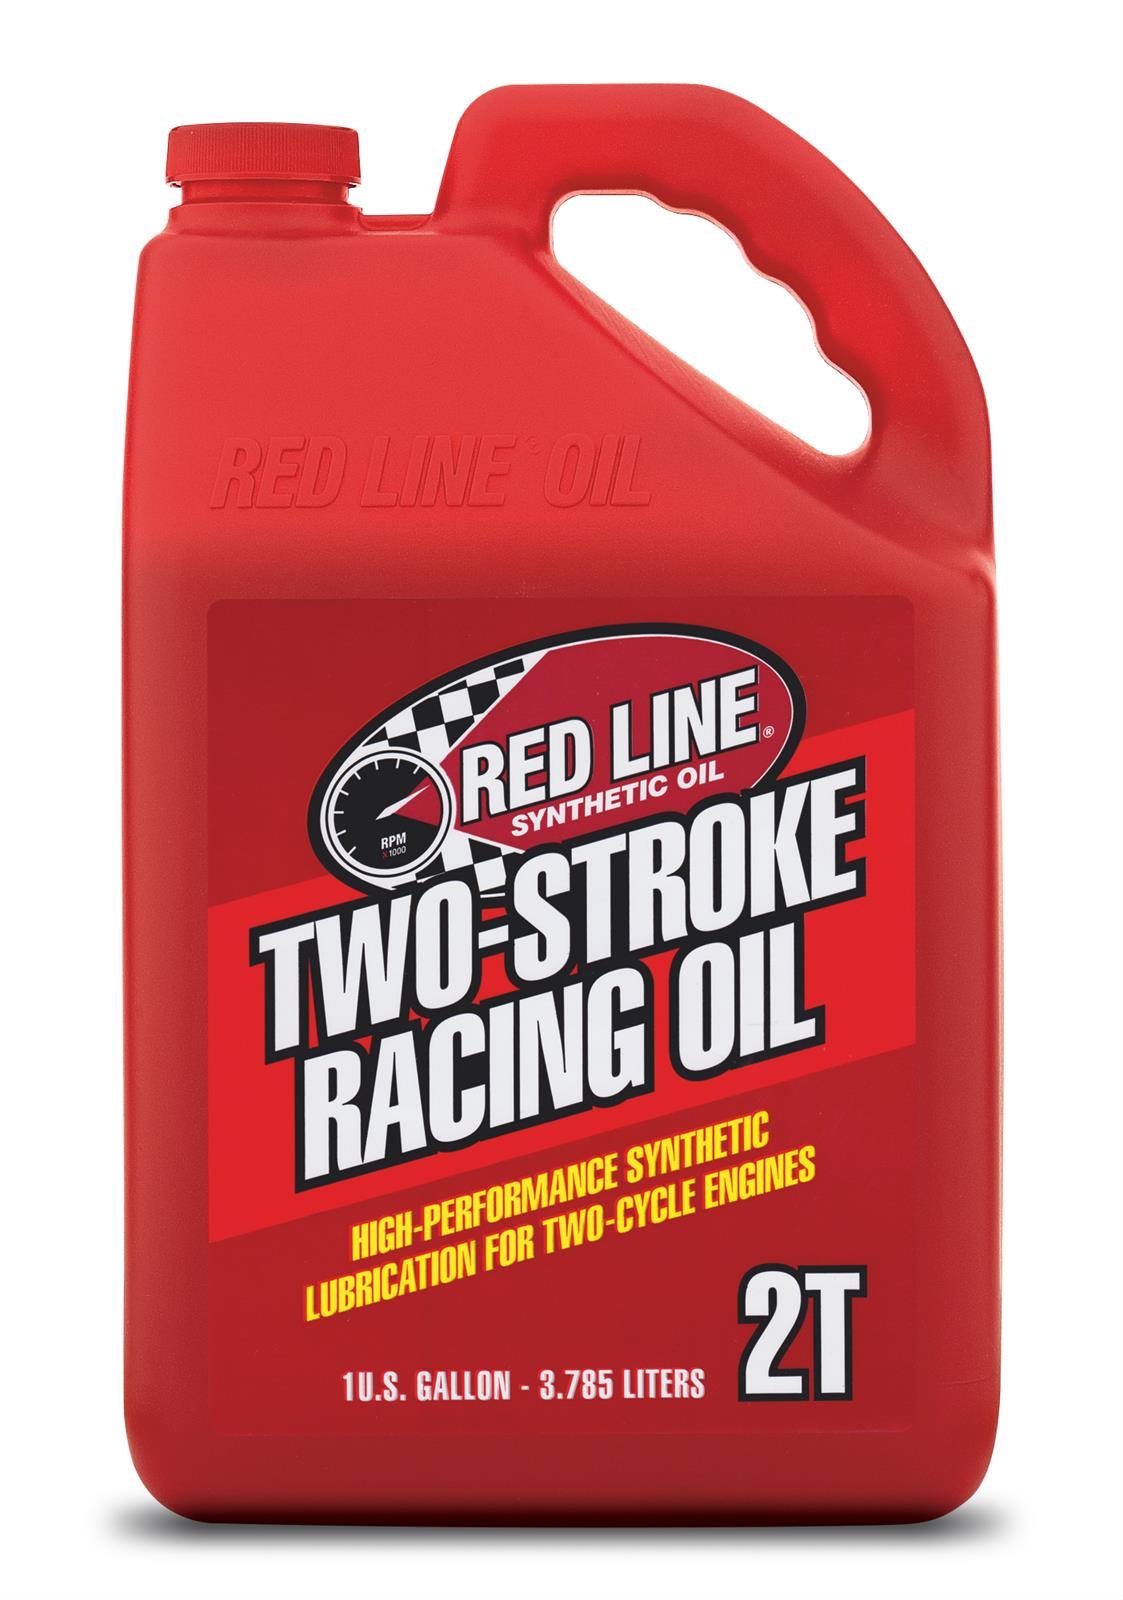 Red Line Synthetic Oil 40605 Red Line Two-Cycle Racing Oil Summit Racing